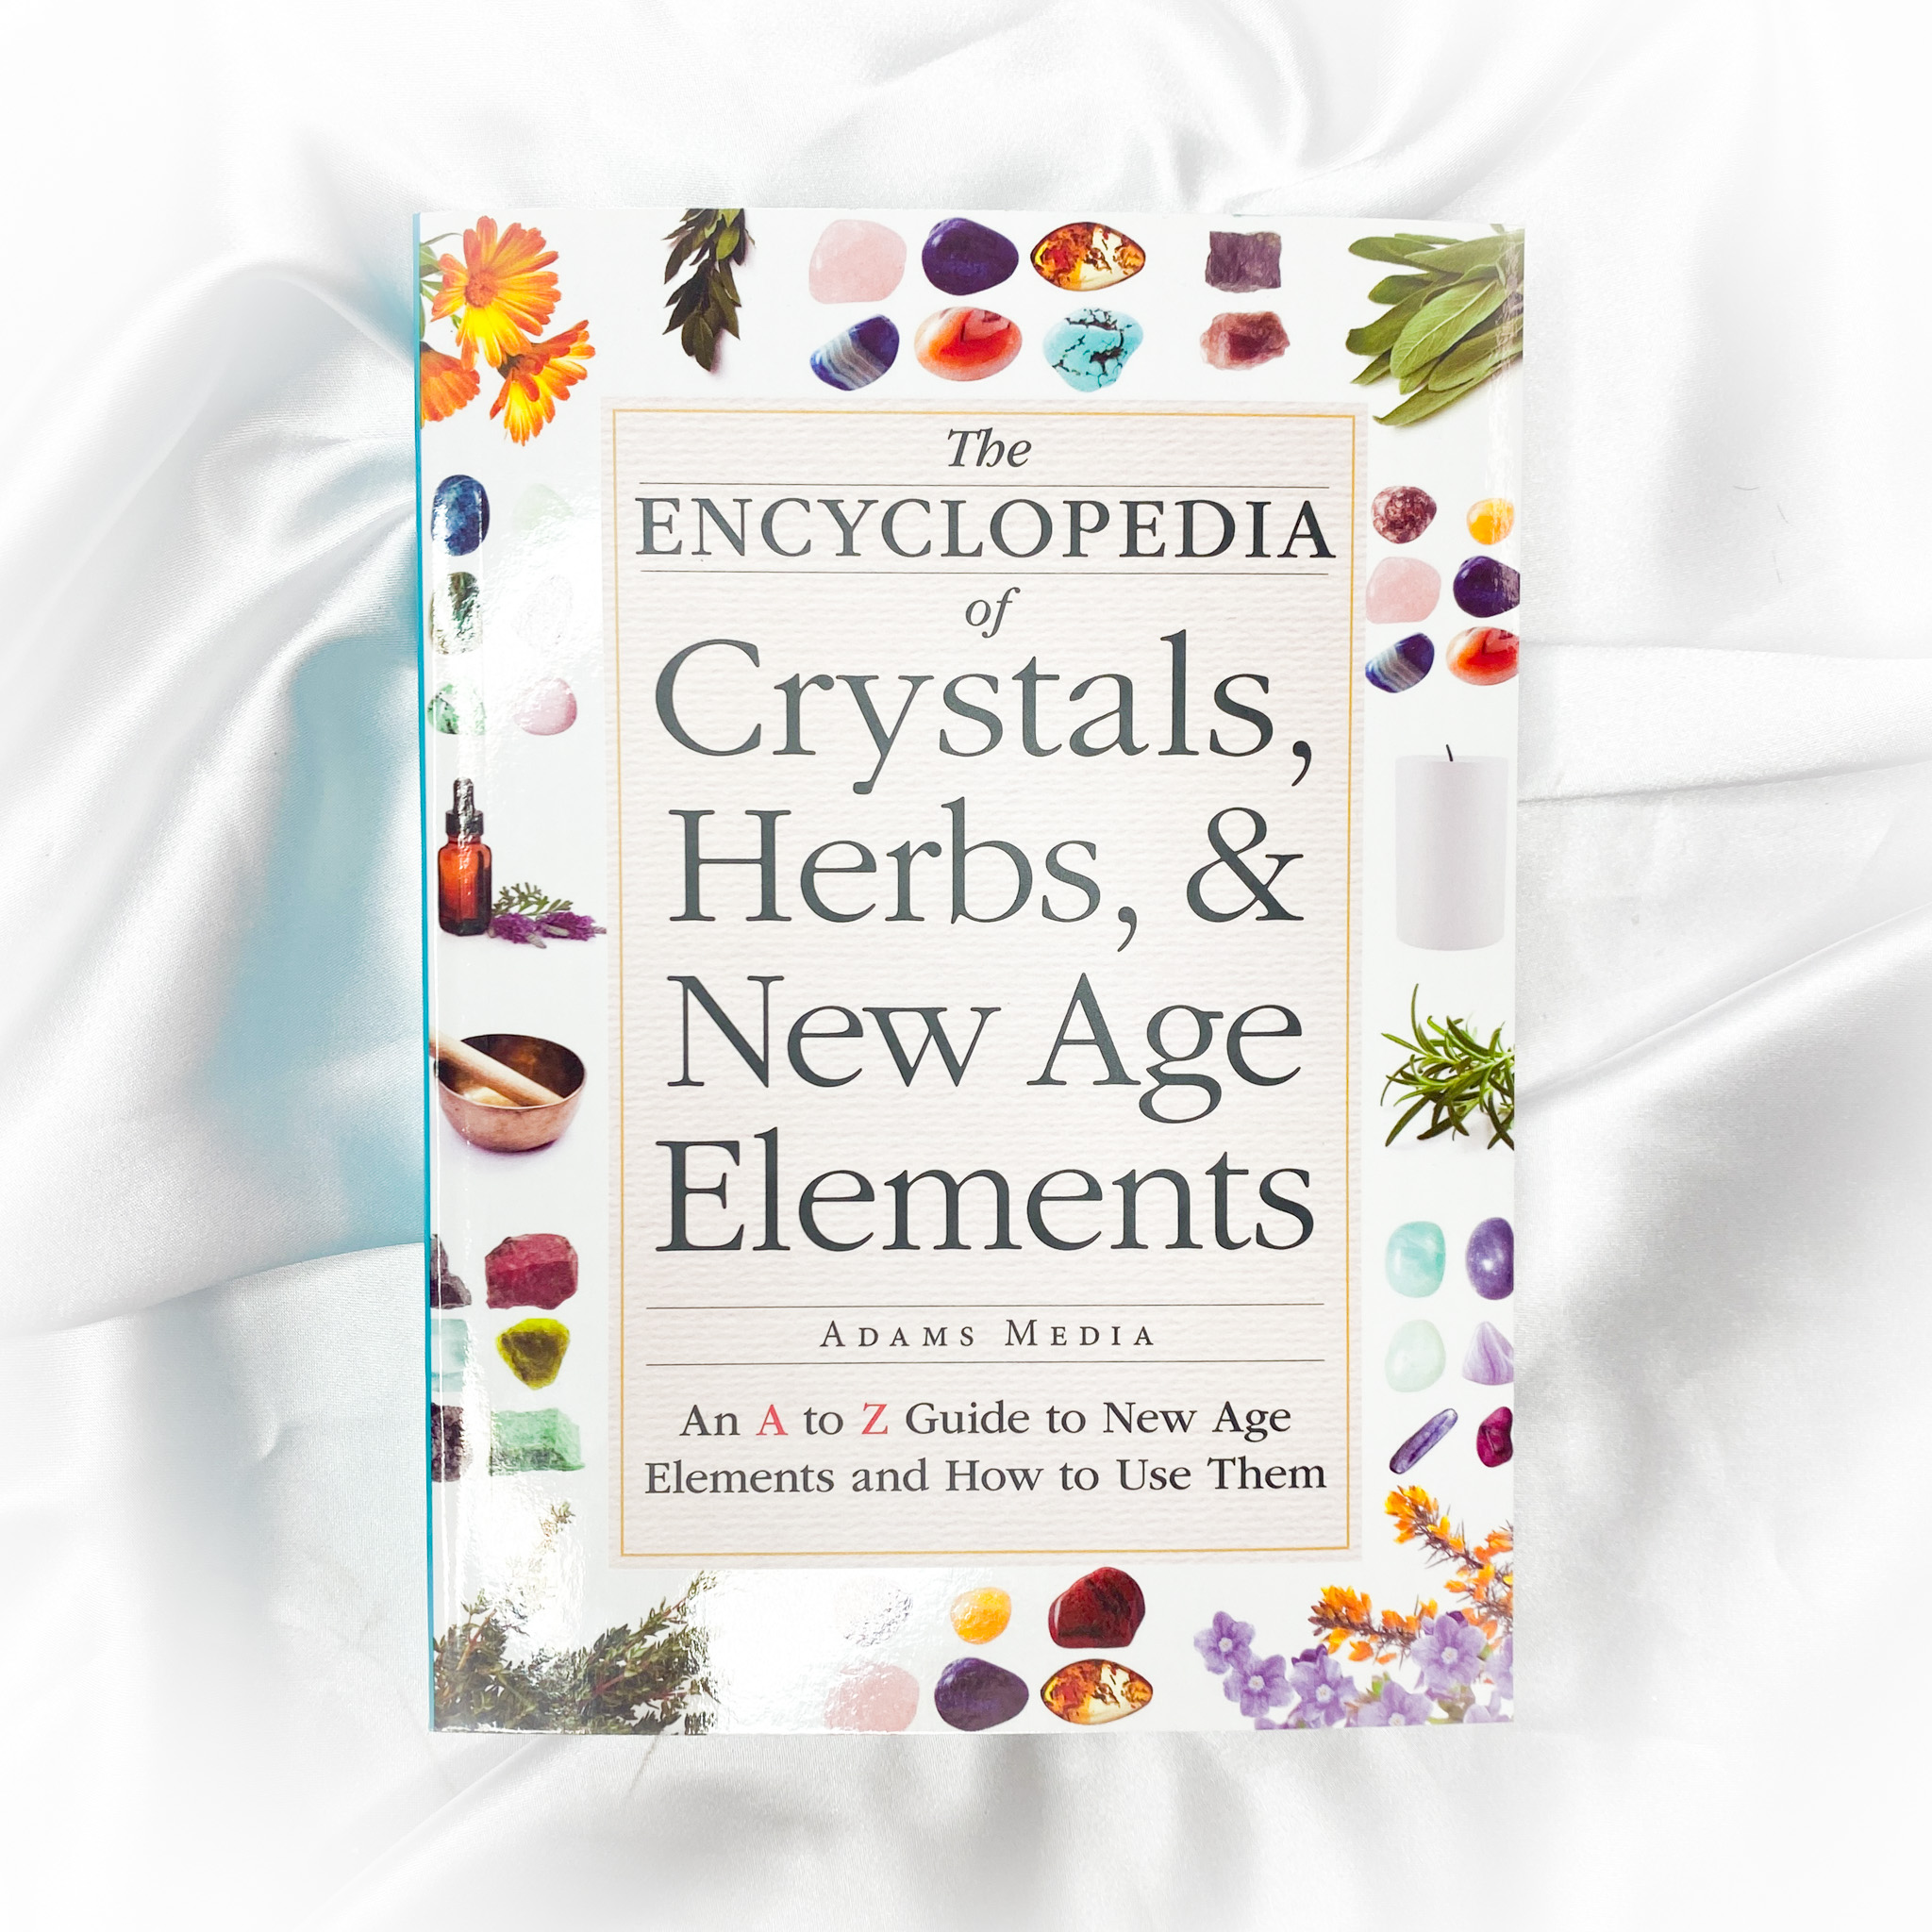 The Encyclopaedia of Crystals, Herbs and New Age Elements